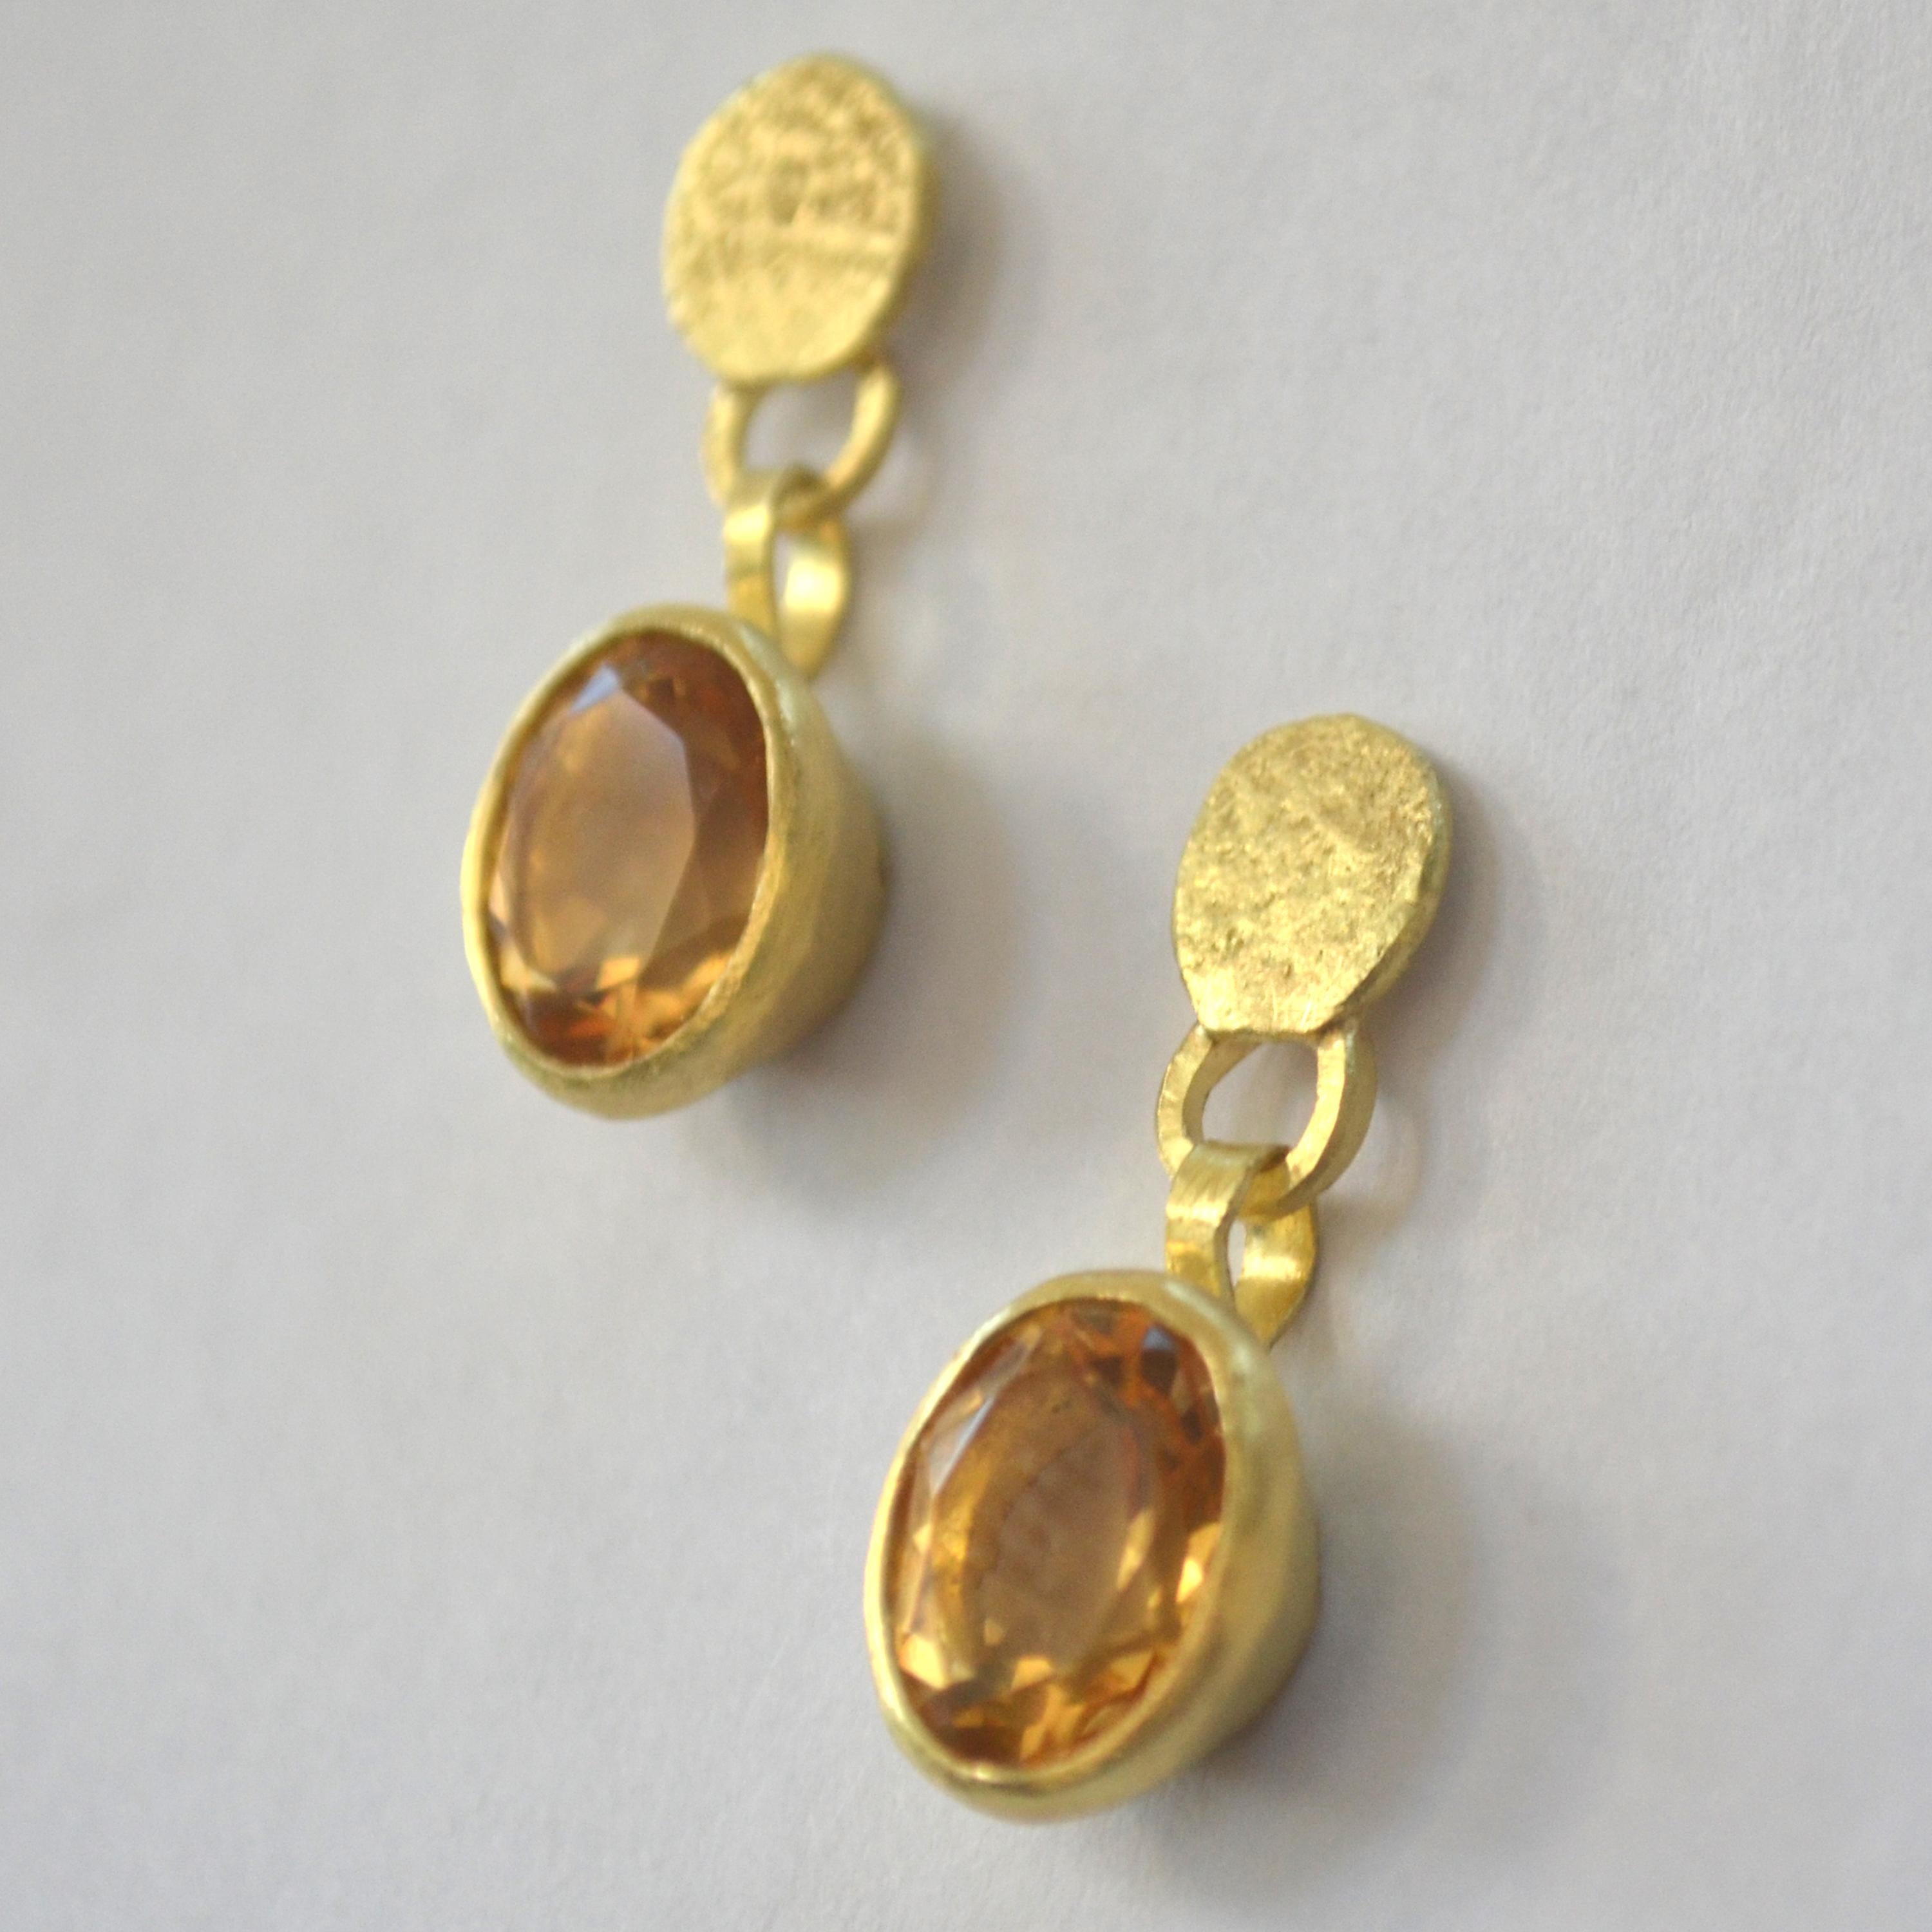 18k yellow gold melted disc stud earrings with citrine drops.

These earrings are handmade by London goldsmith Disa Allsopp. Using reticulation and forging techniques to create her jewellery, Disa is inspired by ancient civilisations and colours